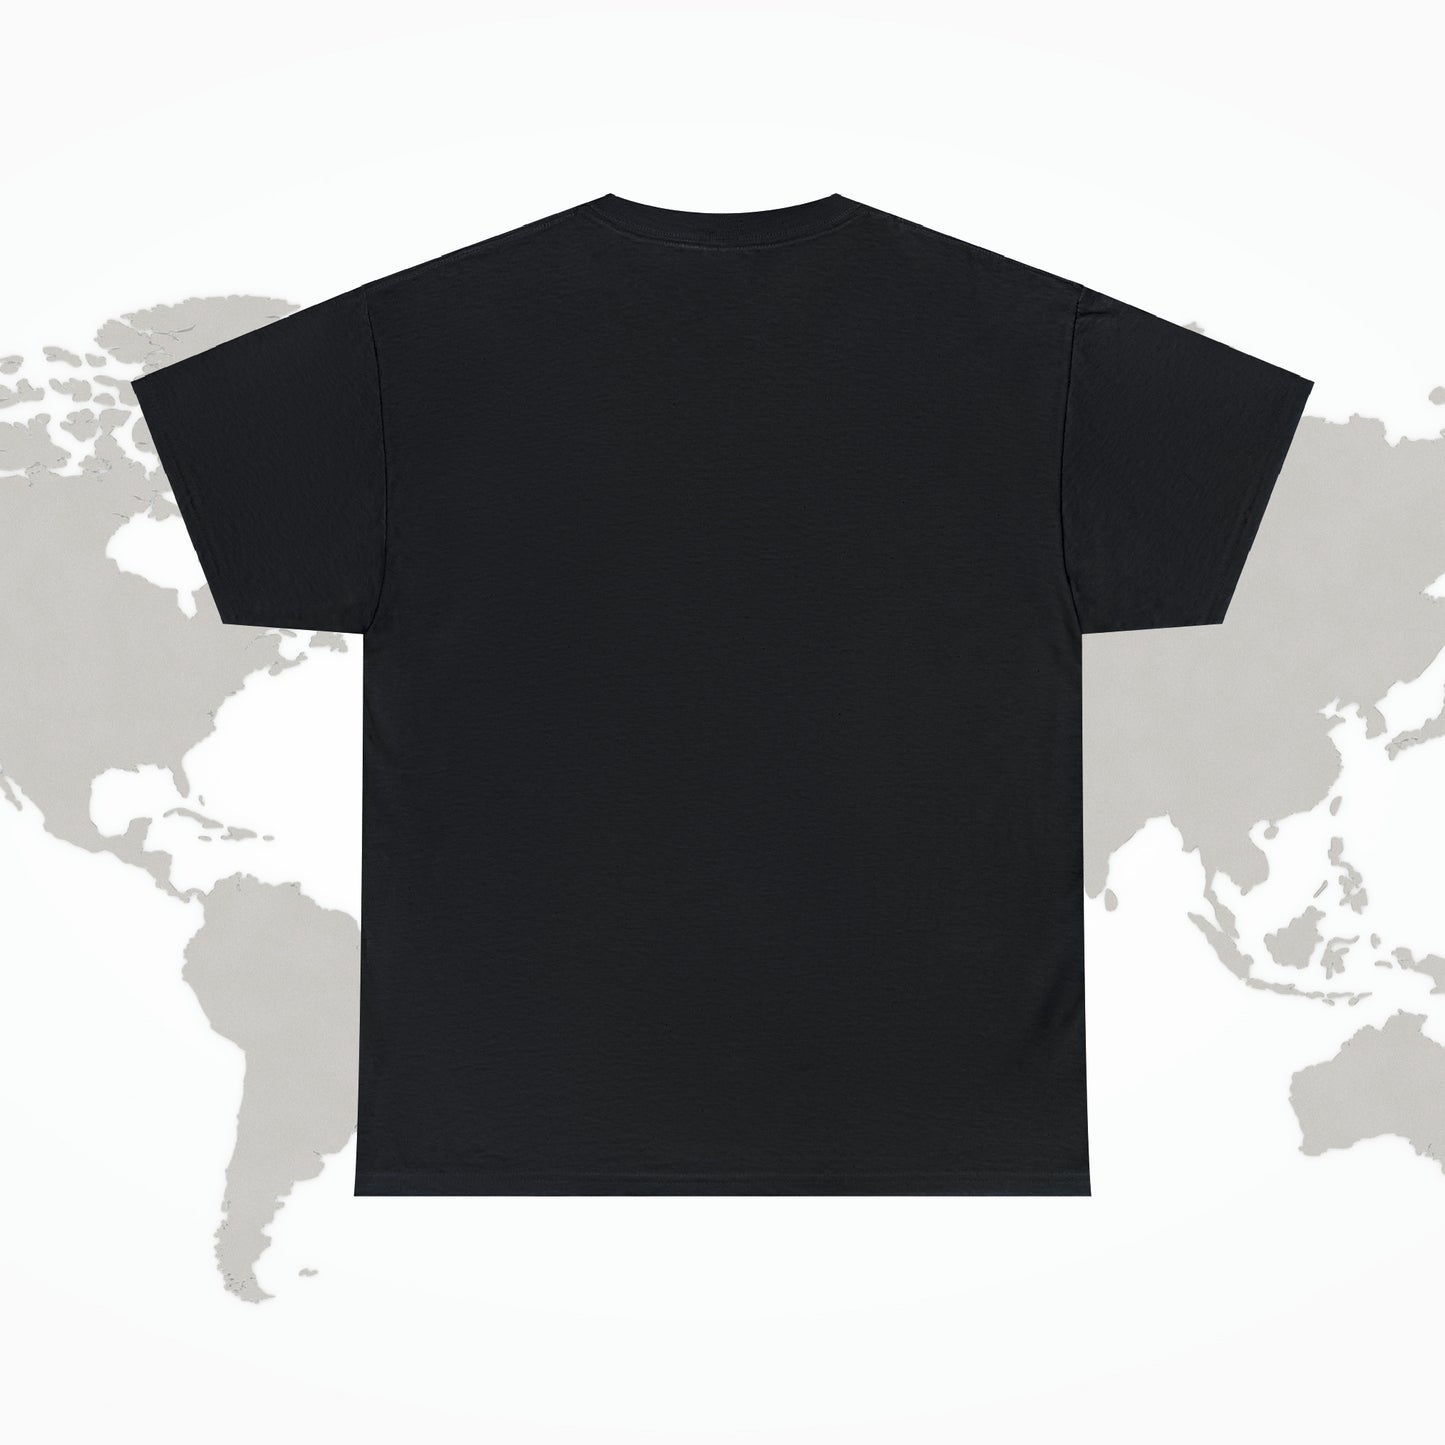 The Shipping Department Tee